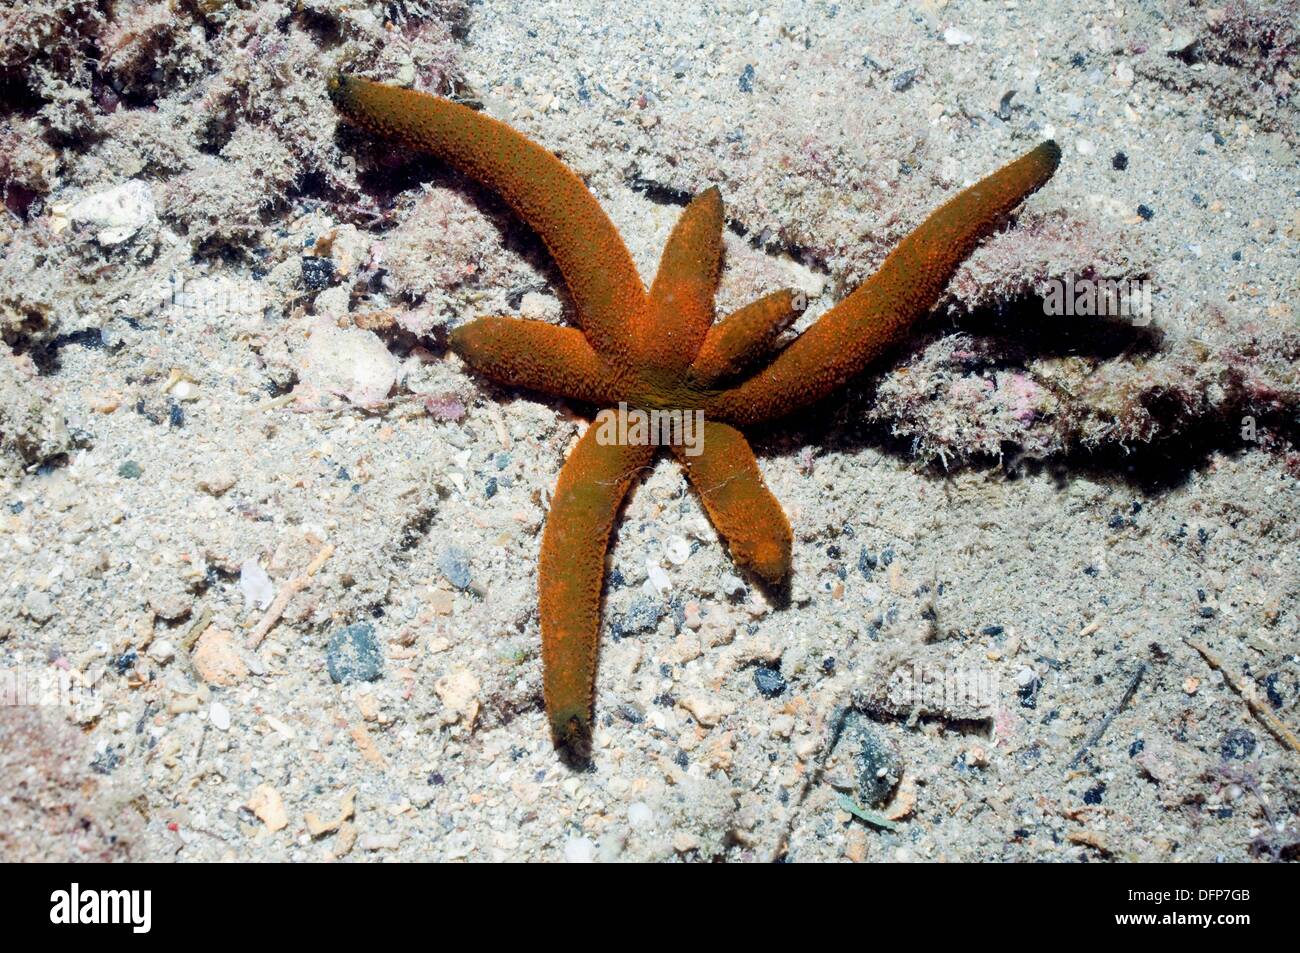 Luzon sea star Echinaster luzonicus  This sea star or starfish has nearly always six or even seven arms, as opposed to the Stock Photo